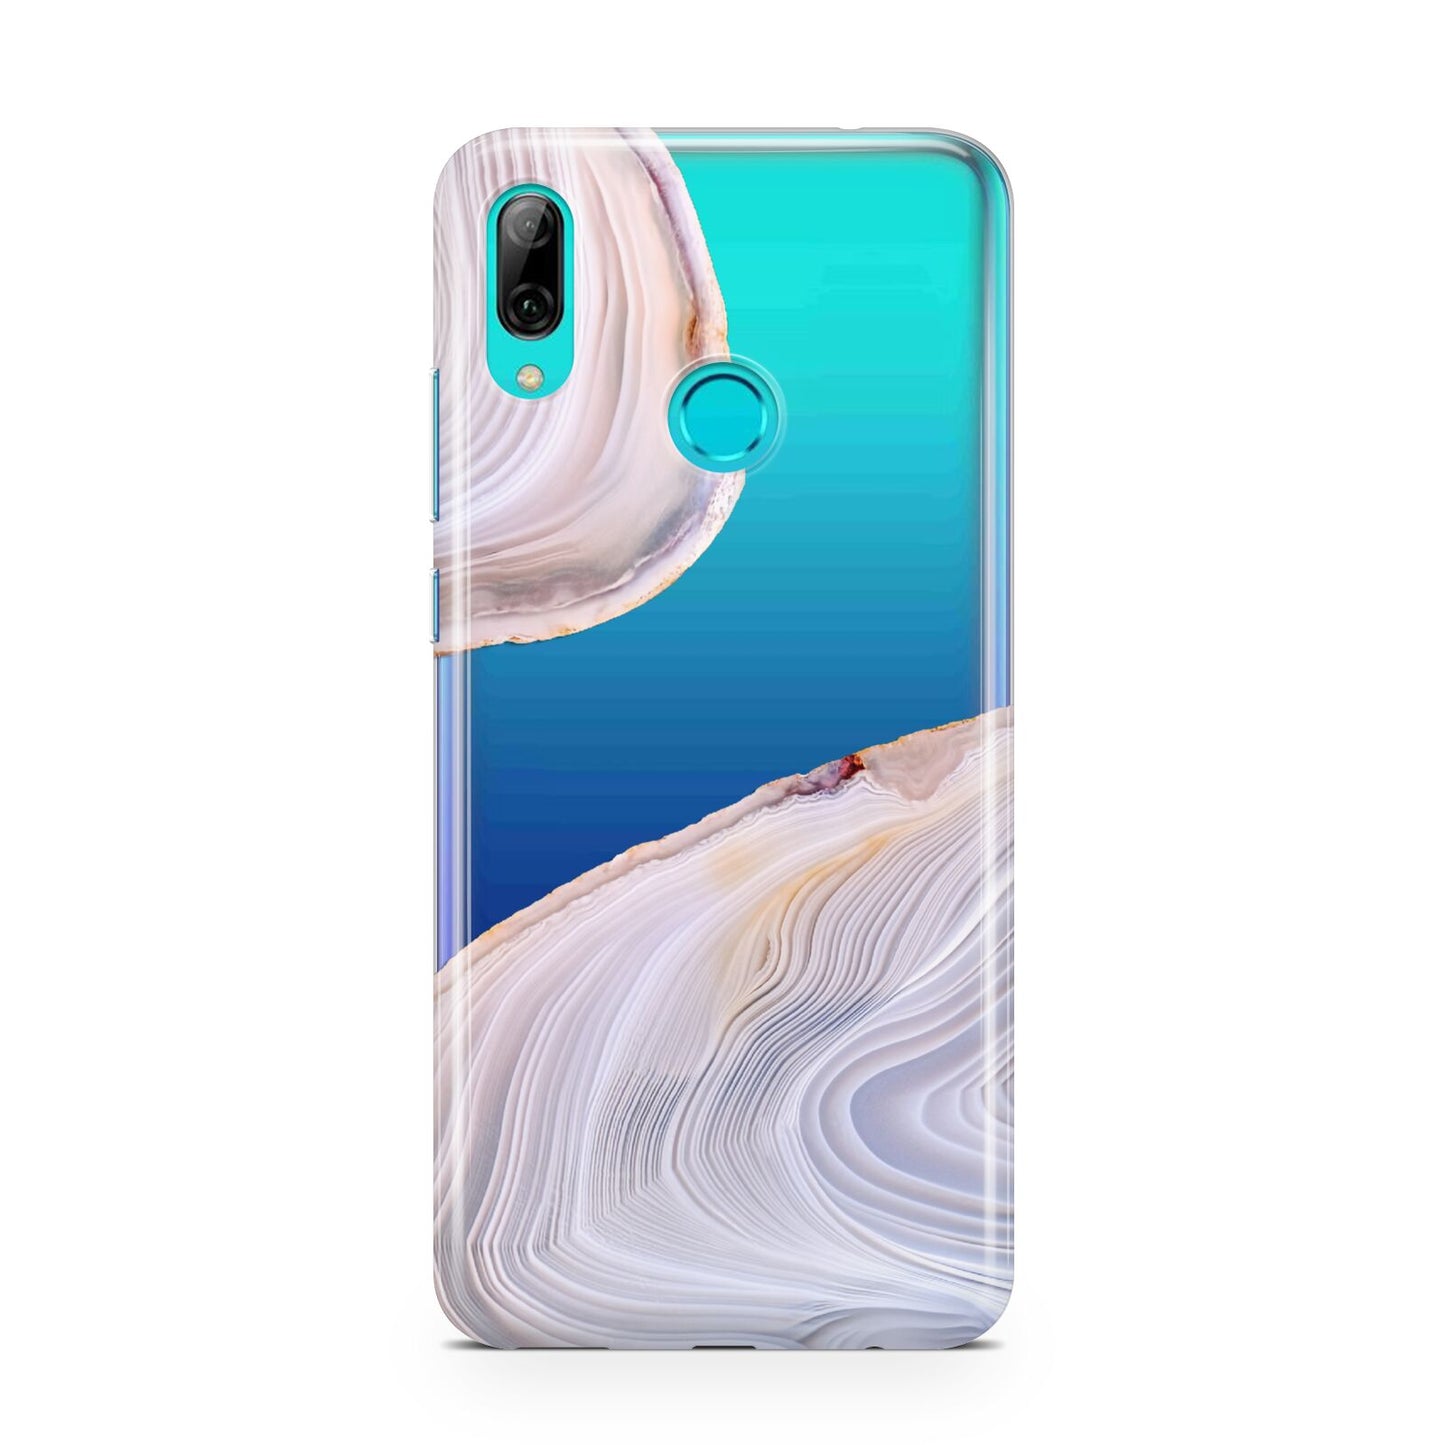 Agate Pale Pink and Blue Huawei P Smart 2019 Case